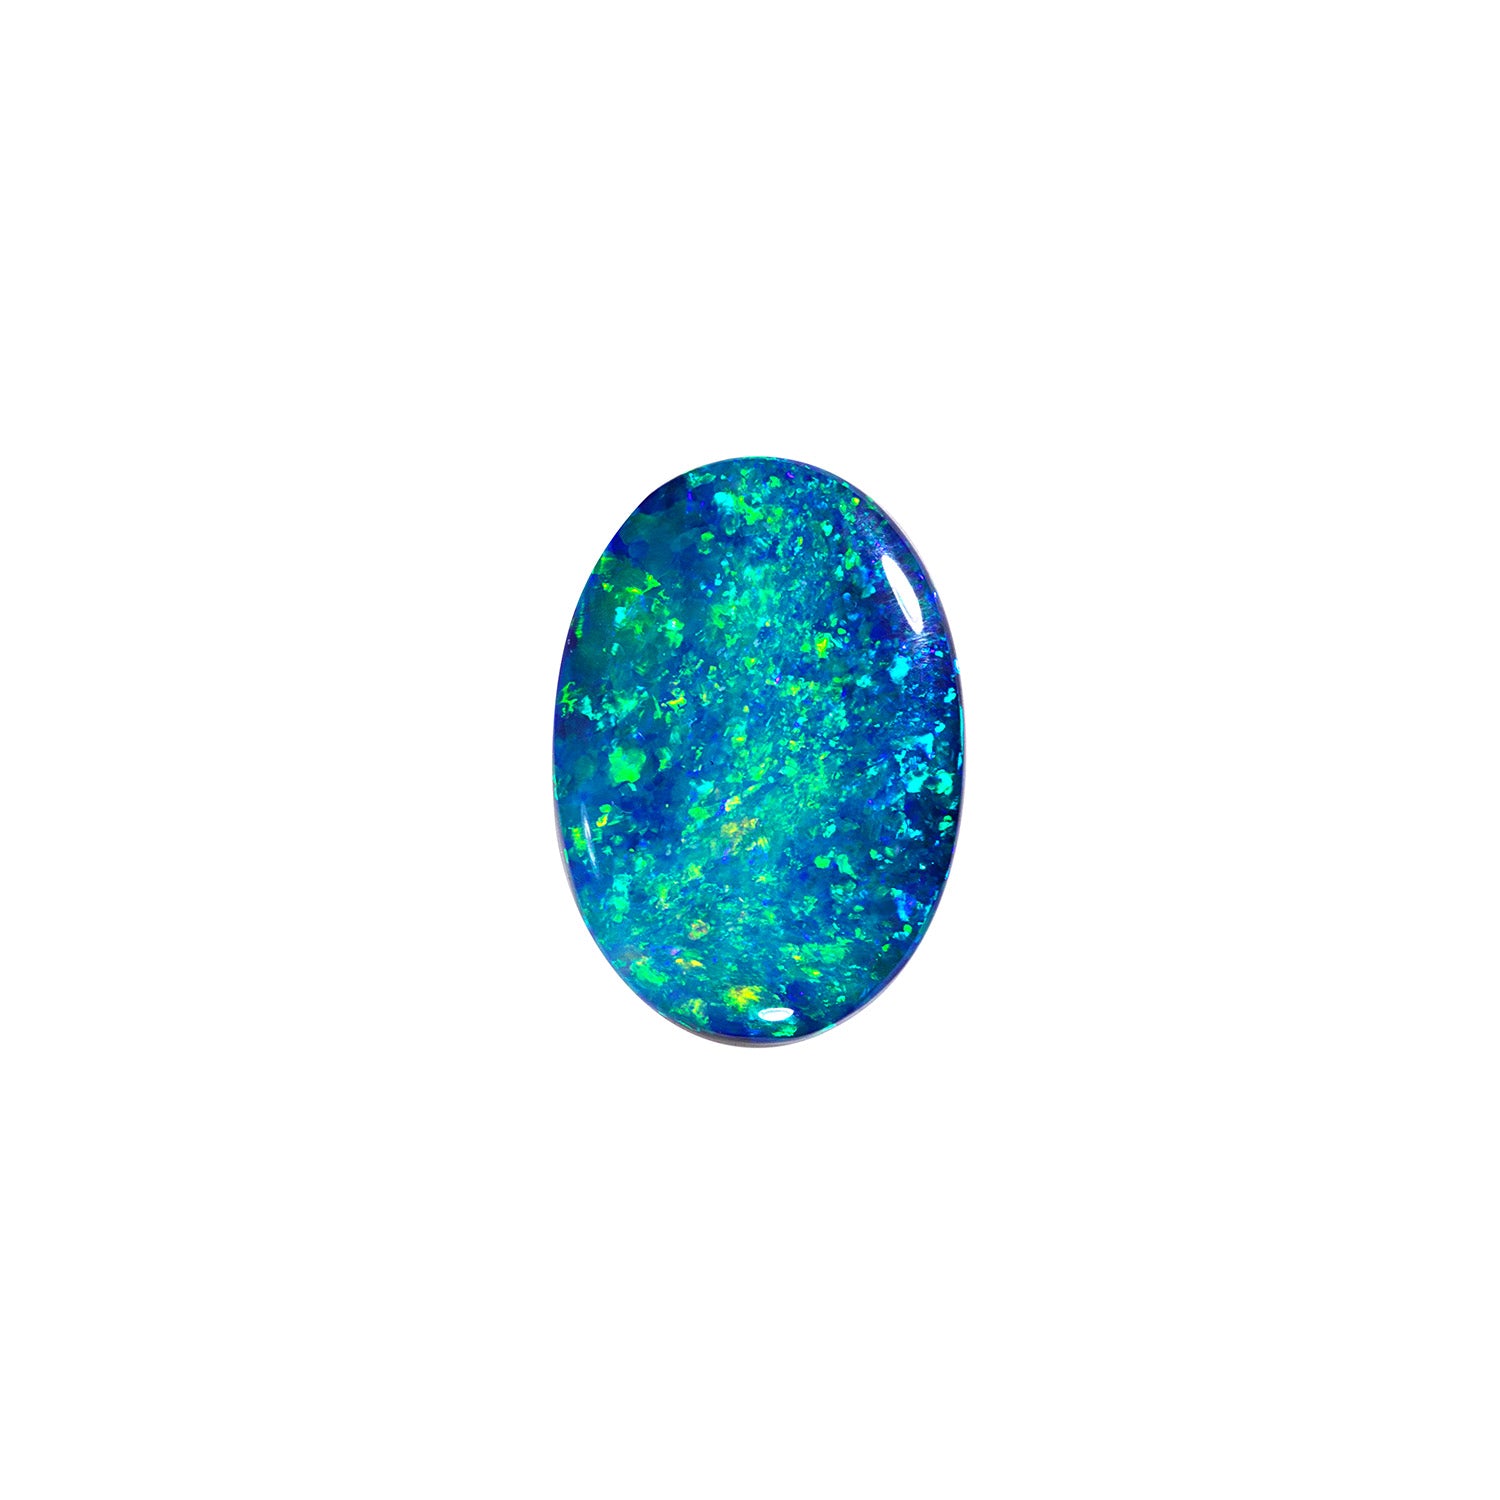 2.35 carat Australian black opal, 10.7 x 9.2 x 3.6 millimeters, featuring captivating blues and greens. Perfect for creating a statement necklace.